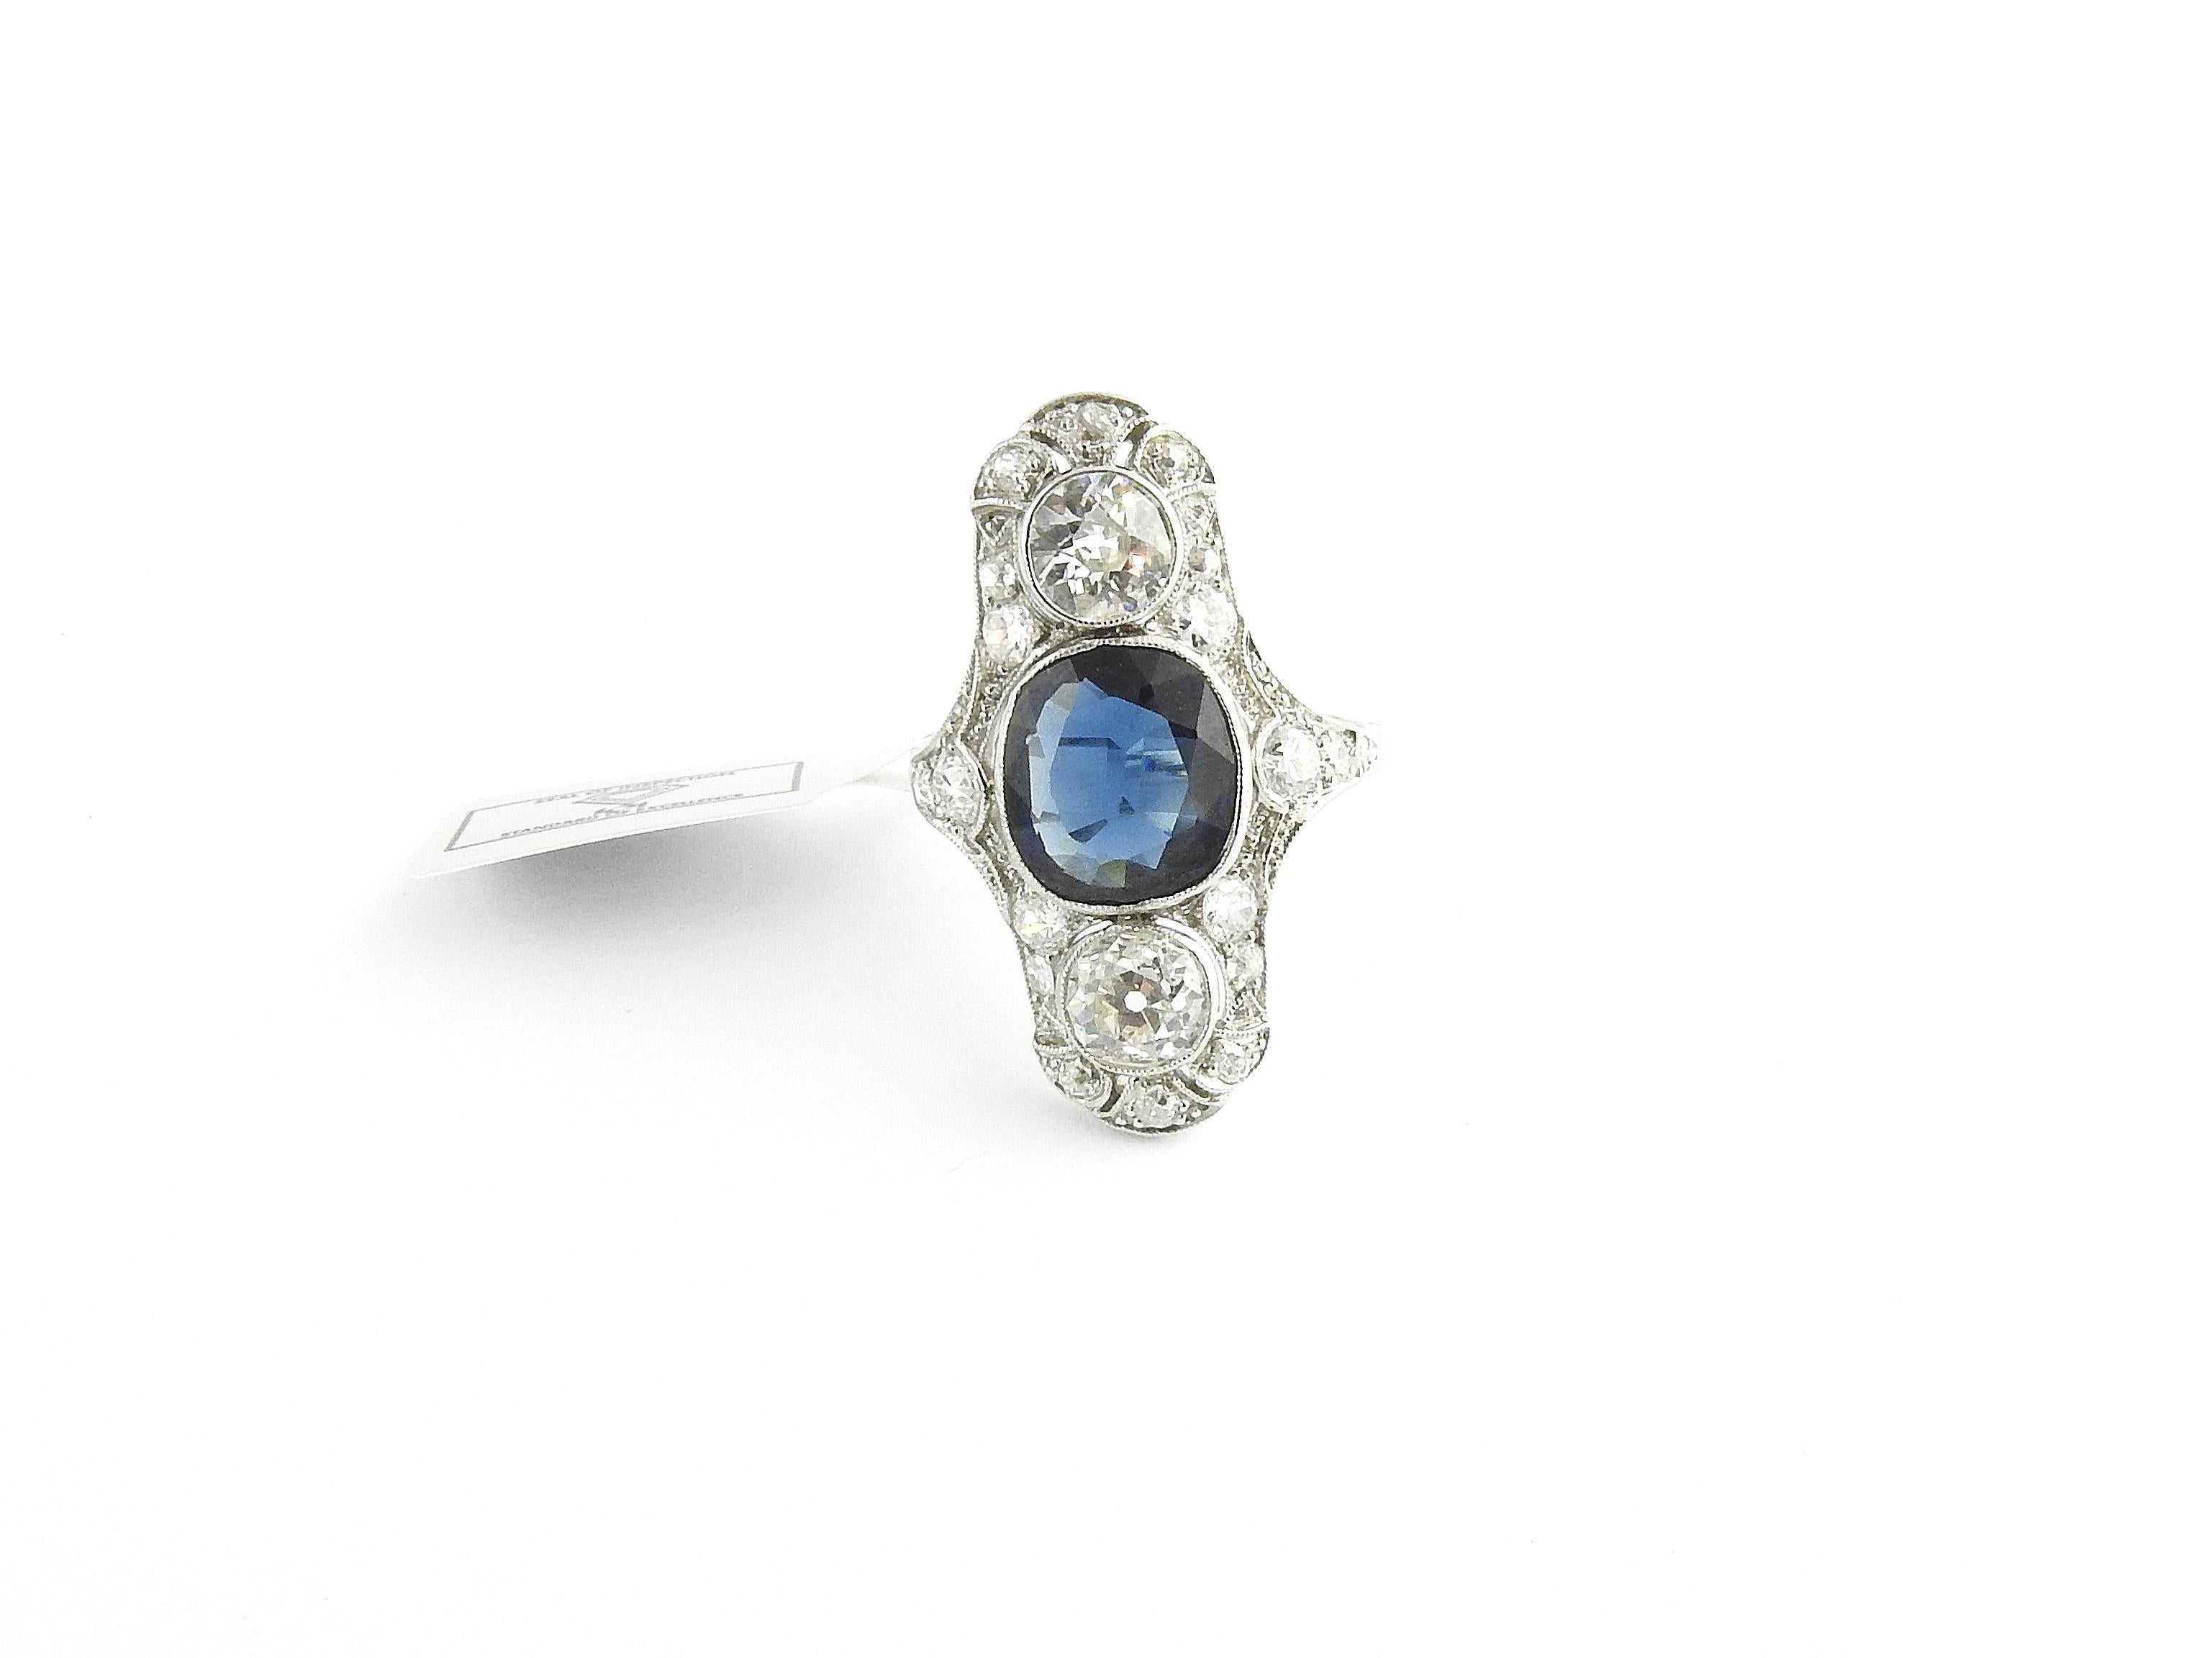 IGI Certified Vintage Platinum Natural Sapphire and Diamond Ring

Size 8

Front of the ring measures 28 mm in length, 17 mm wide and 4 mm thick.

3.9 dwt / 6.2 g

Center stone is a natural sapphire at 3.07 carats. Cushion Mixed Cut. Evidence of heat